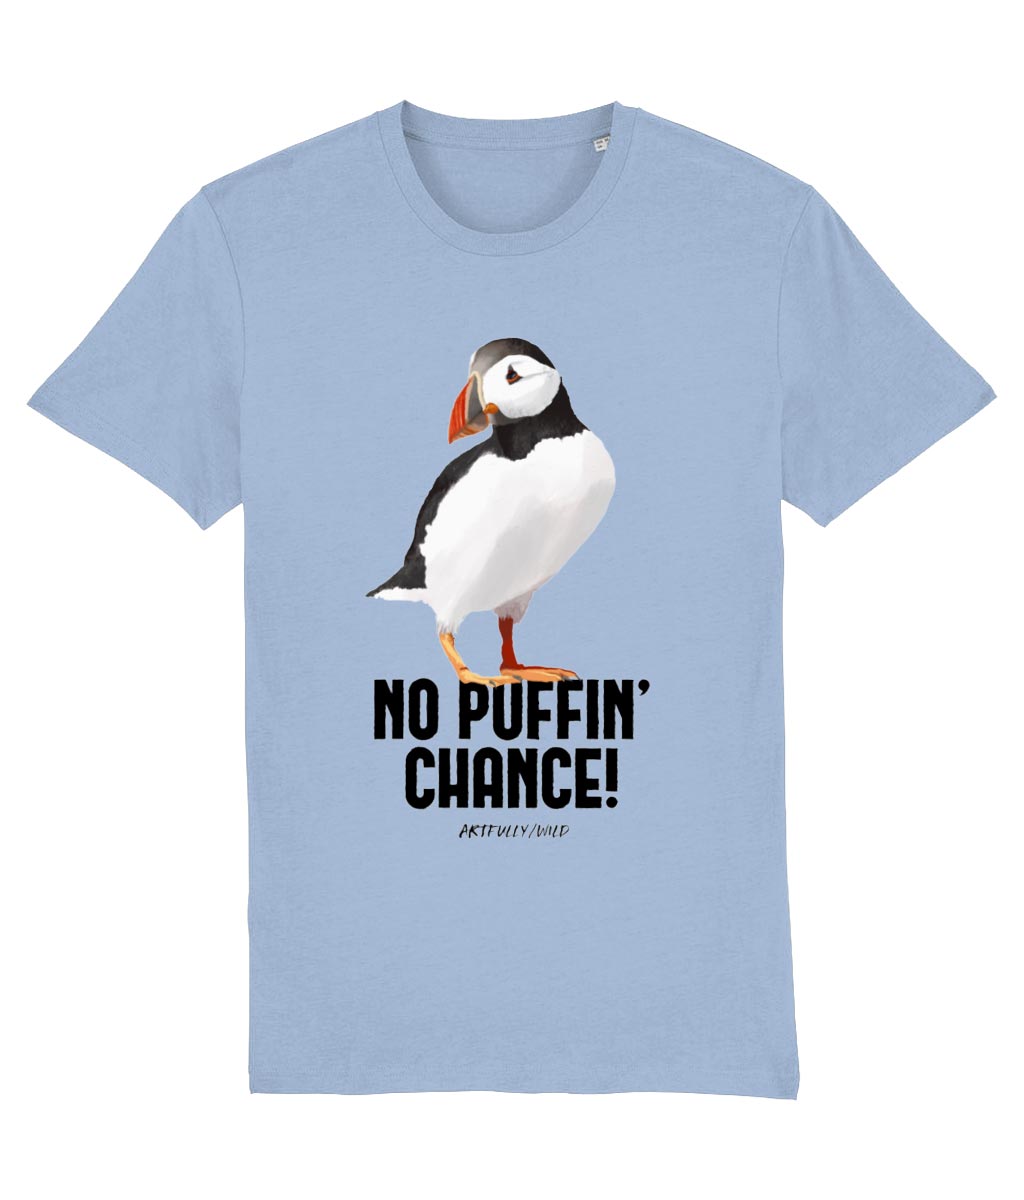 'NO PUFFIN CHANCE' Print on Sky Blue Organic T-Shirt. Unisex/Women/Men. Ethical Clothing. Original Painted Illustration by Artfully/Wild. Printed with water-based inks.